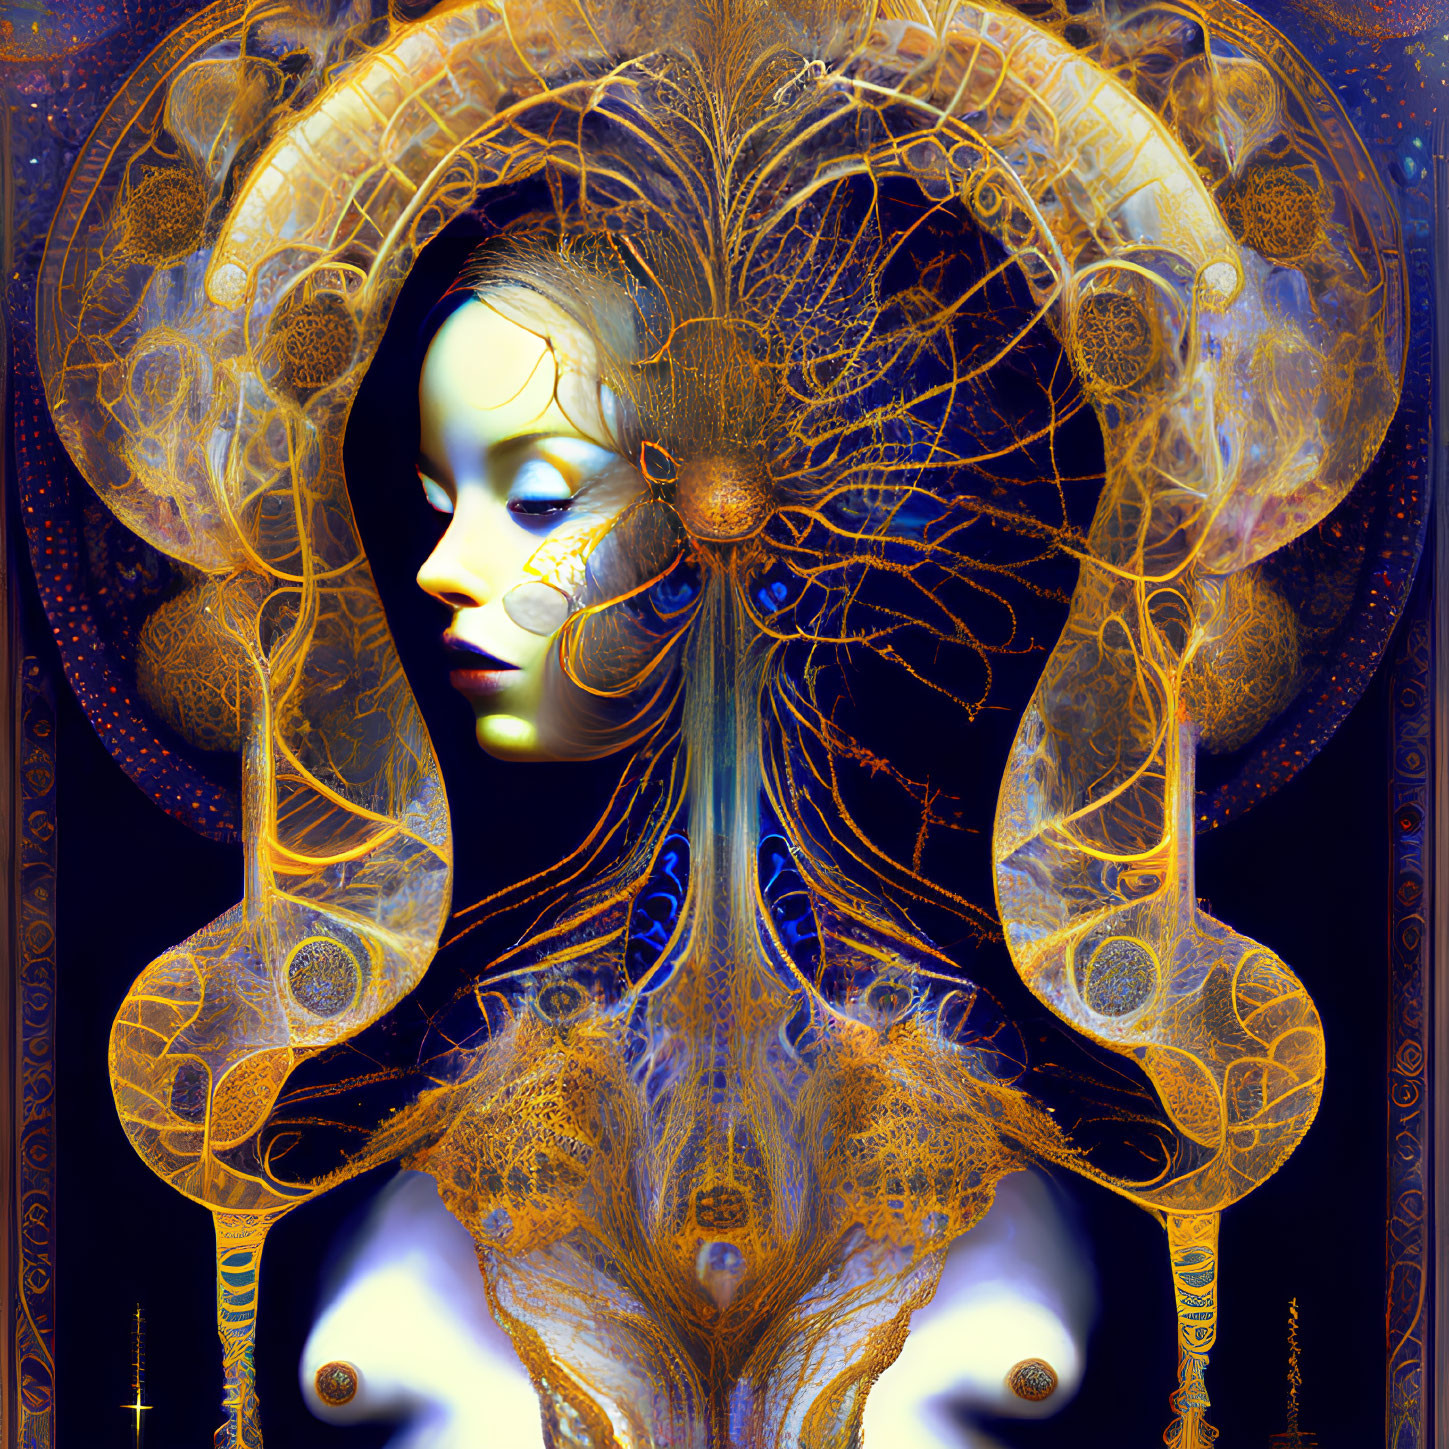 Stylized digital artwork of a female figure with intricate golden patterns.